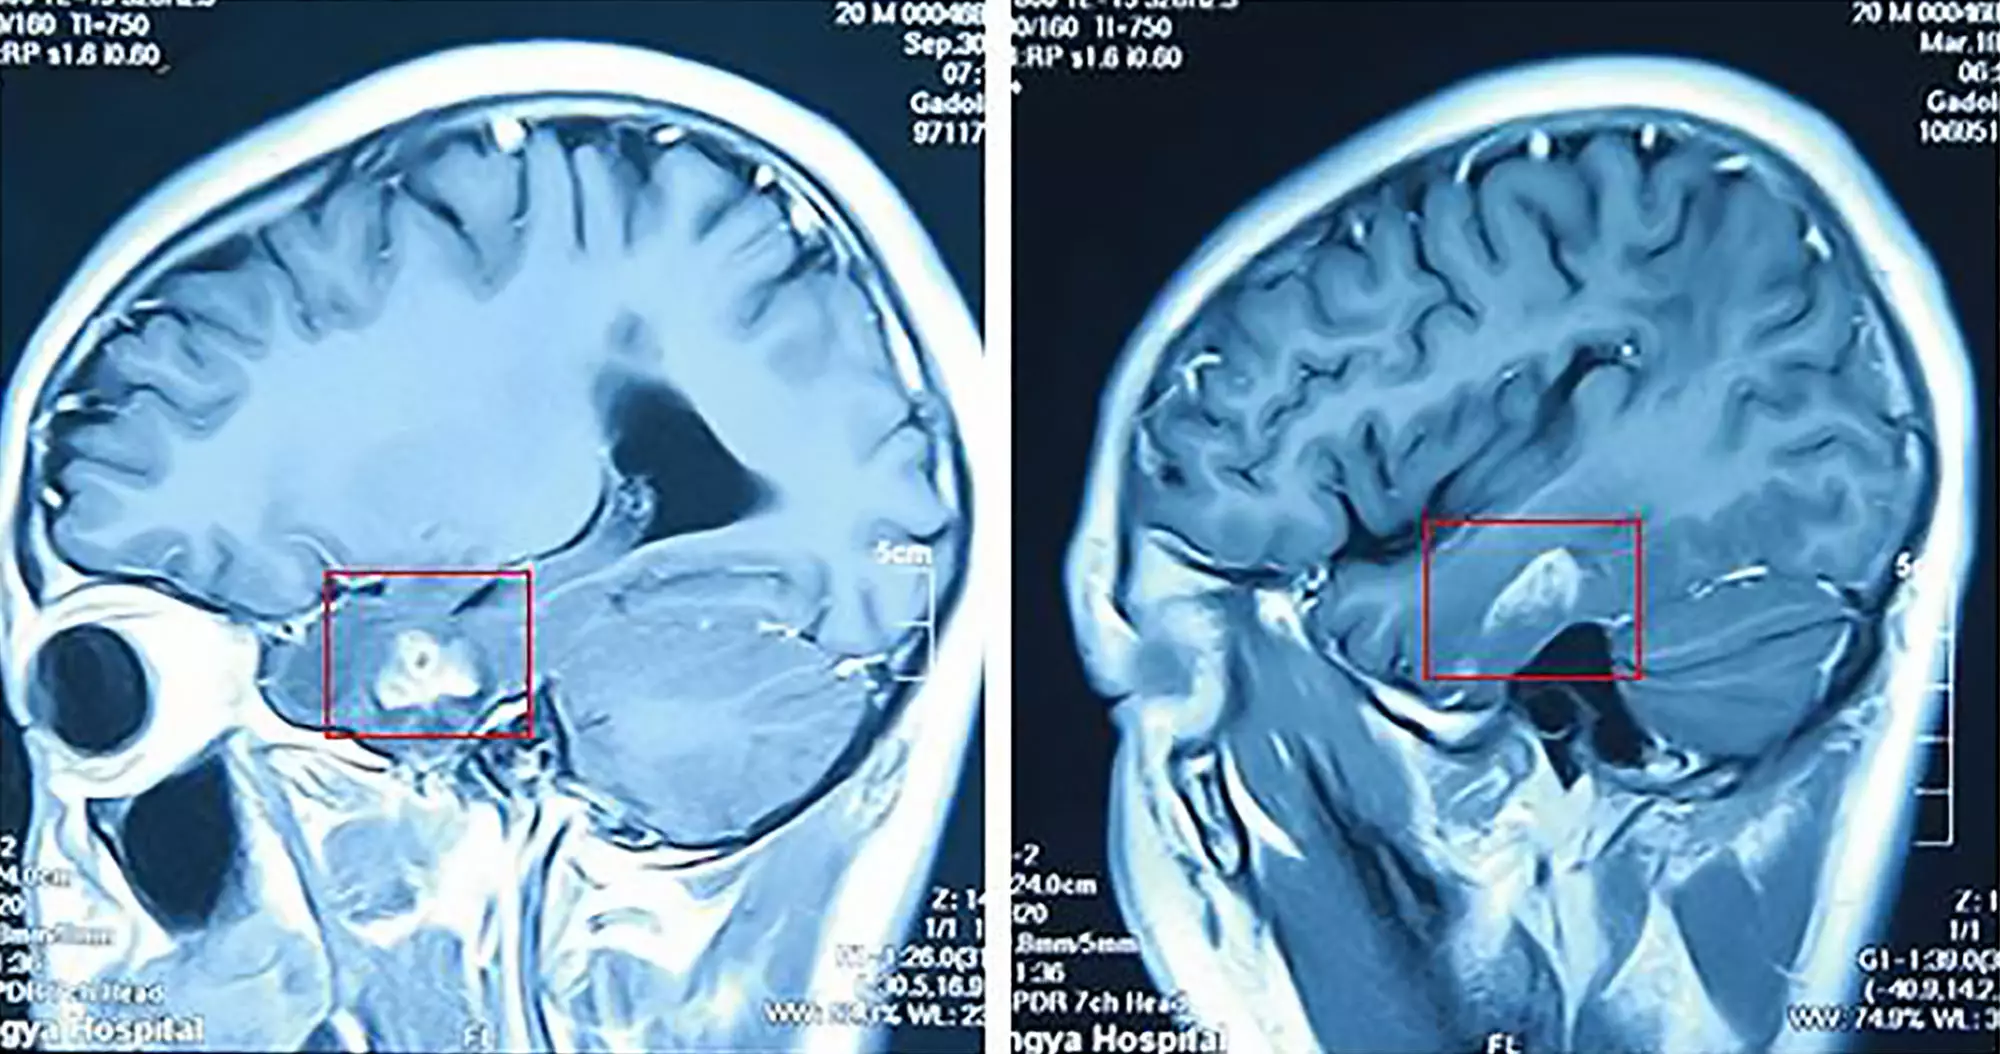 Doctors removed a four-inch-long parasitic tapeworm from this patient's brain.